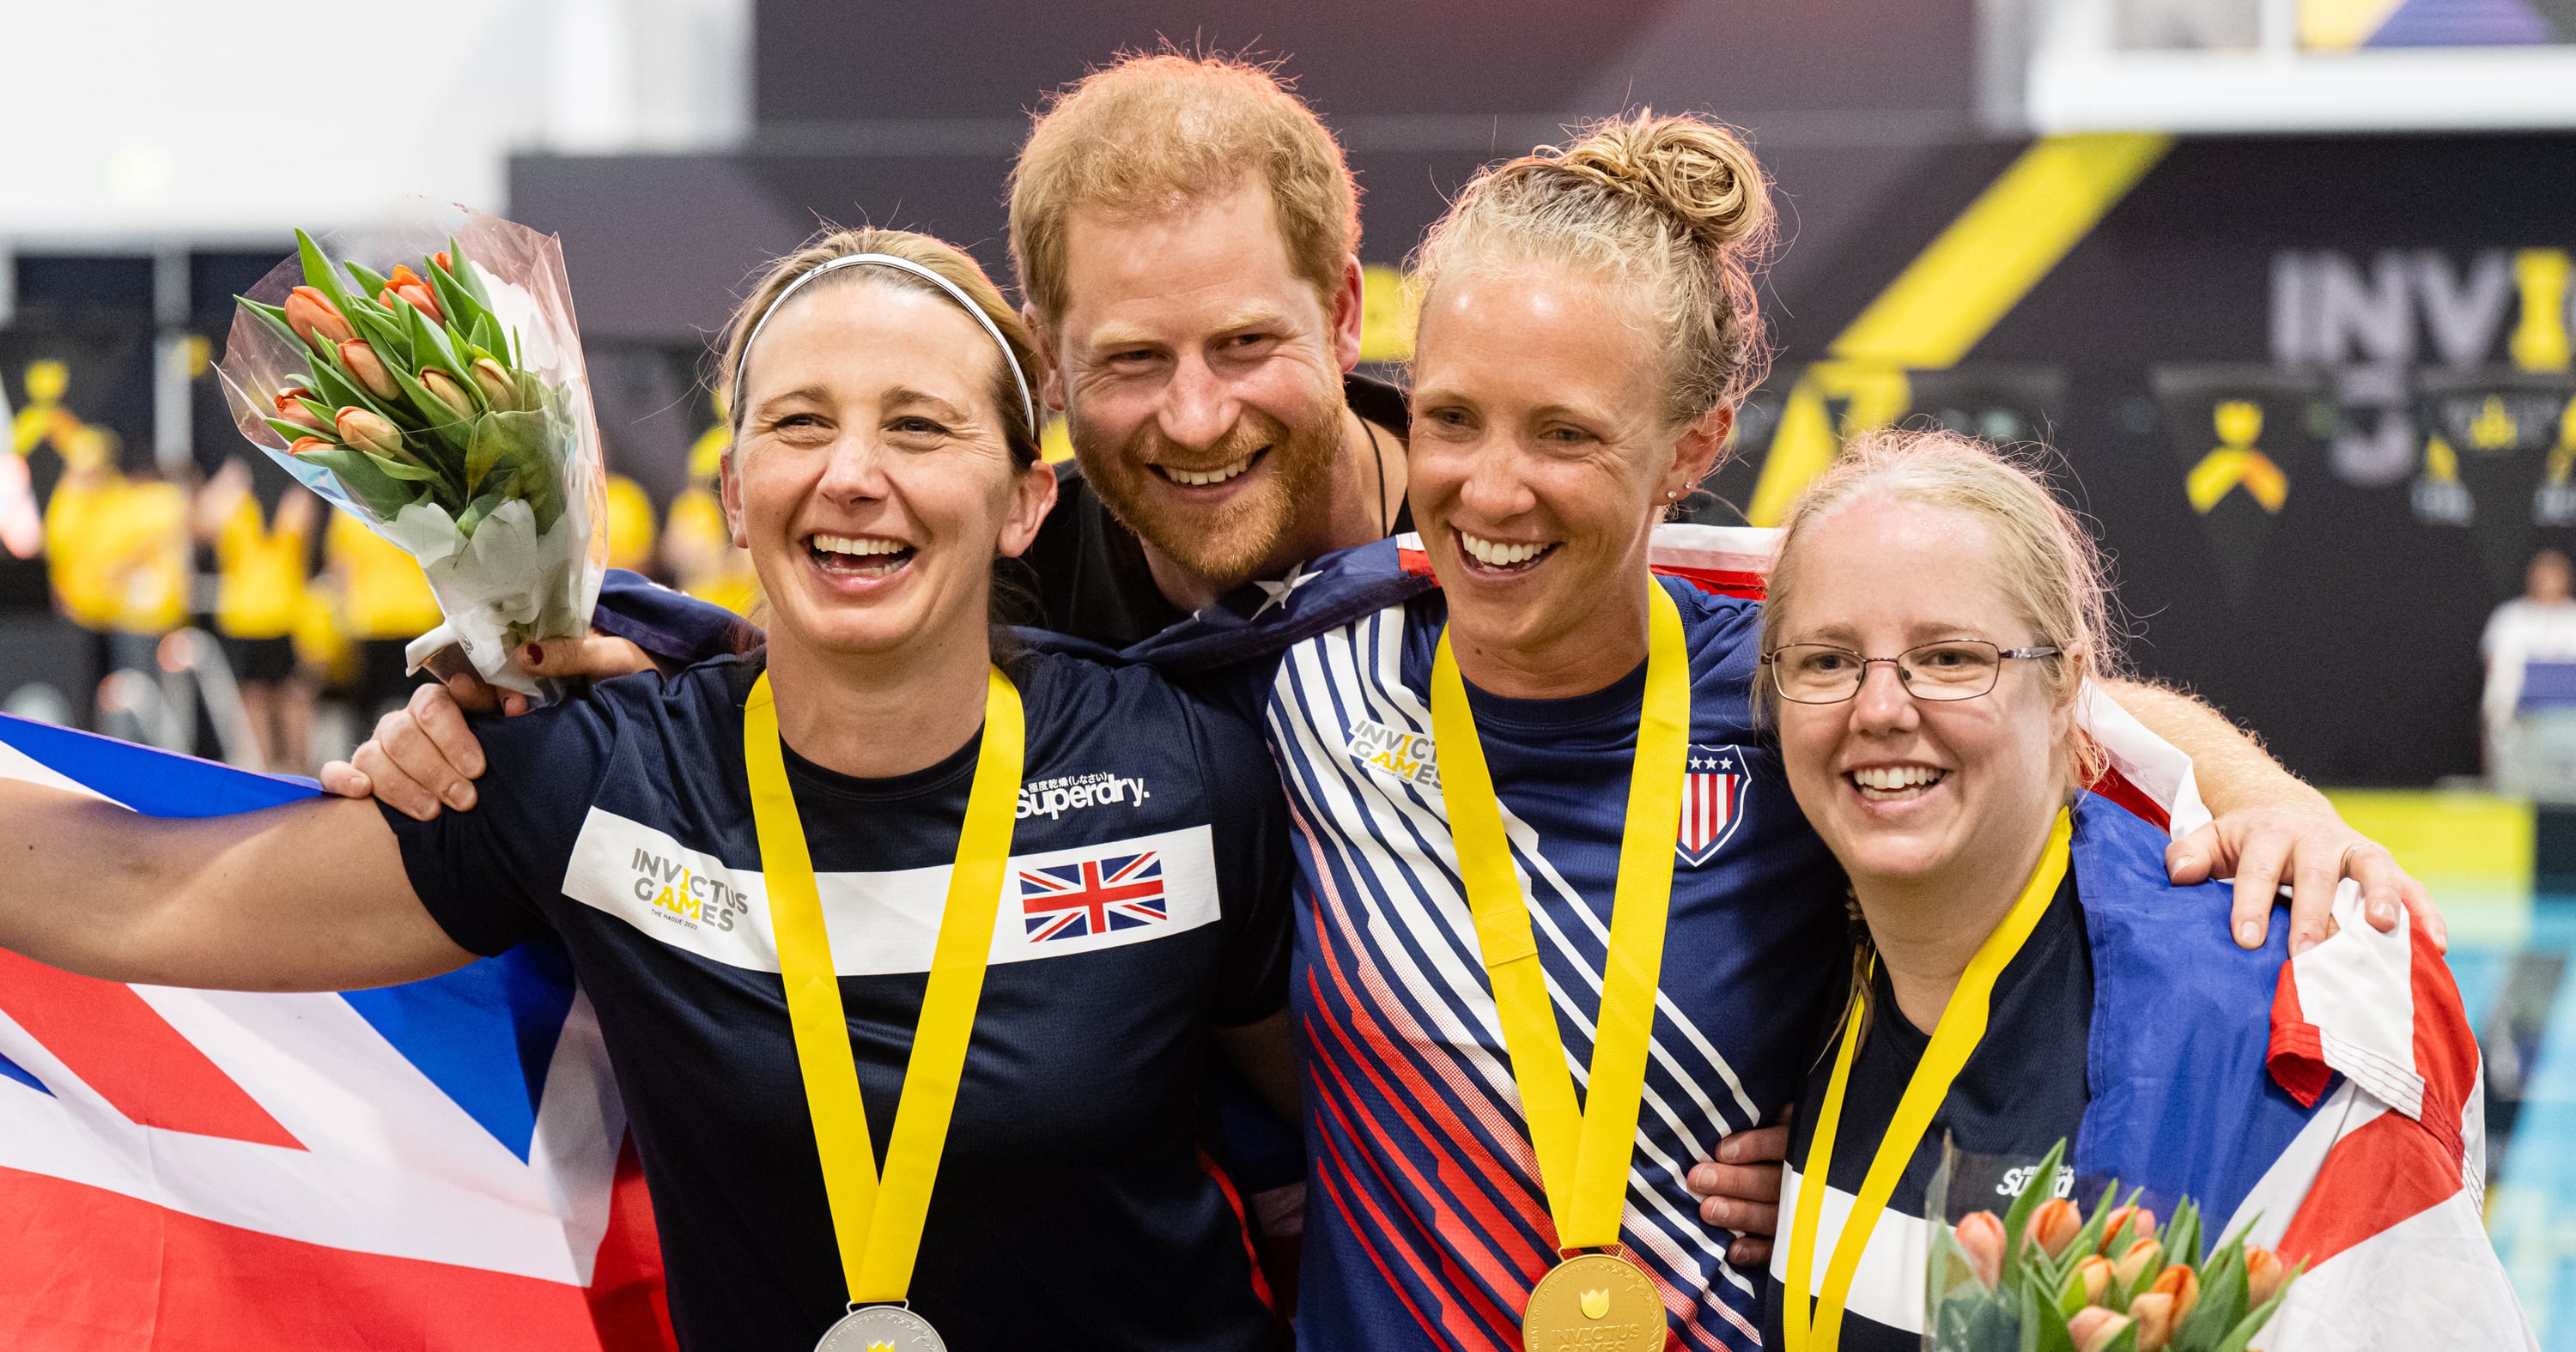 Netflix Releases Official Trailer For Prince Harry’s “Heart of Invictus” Docuseries